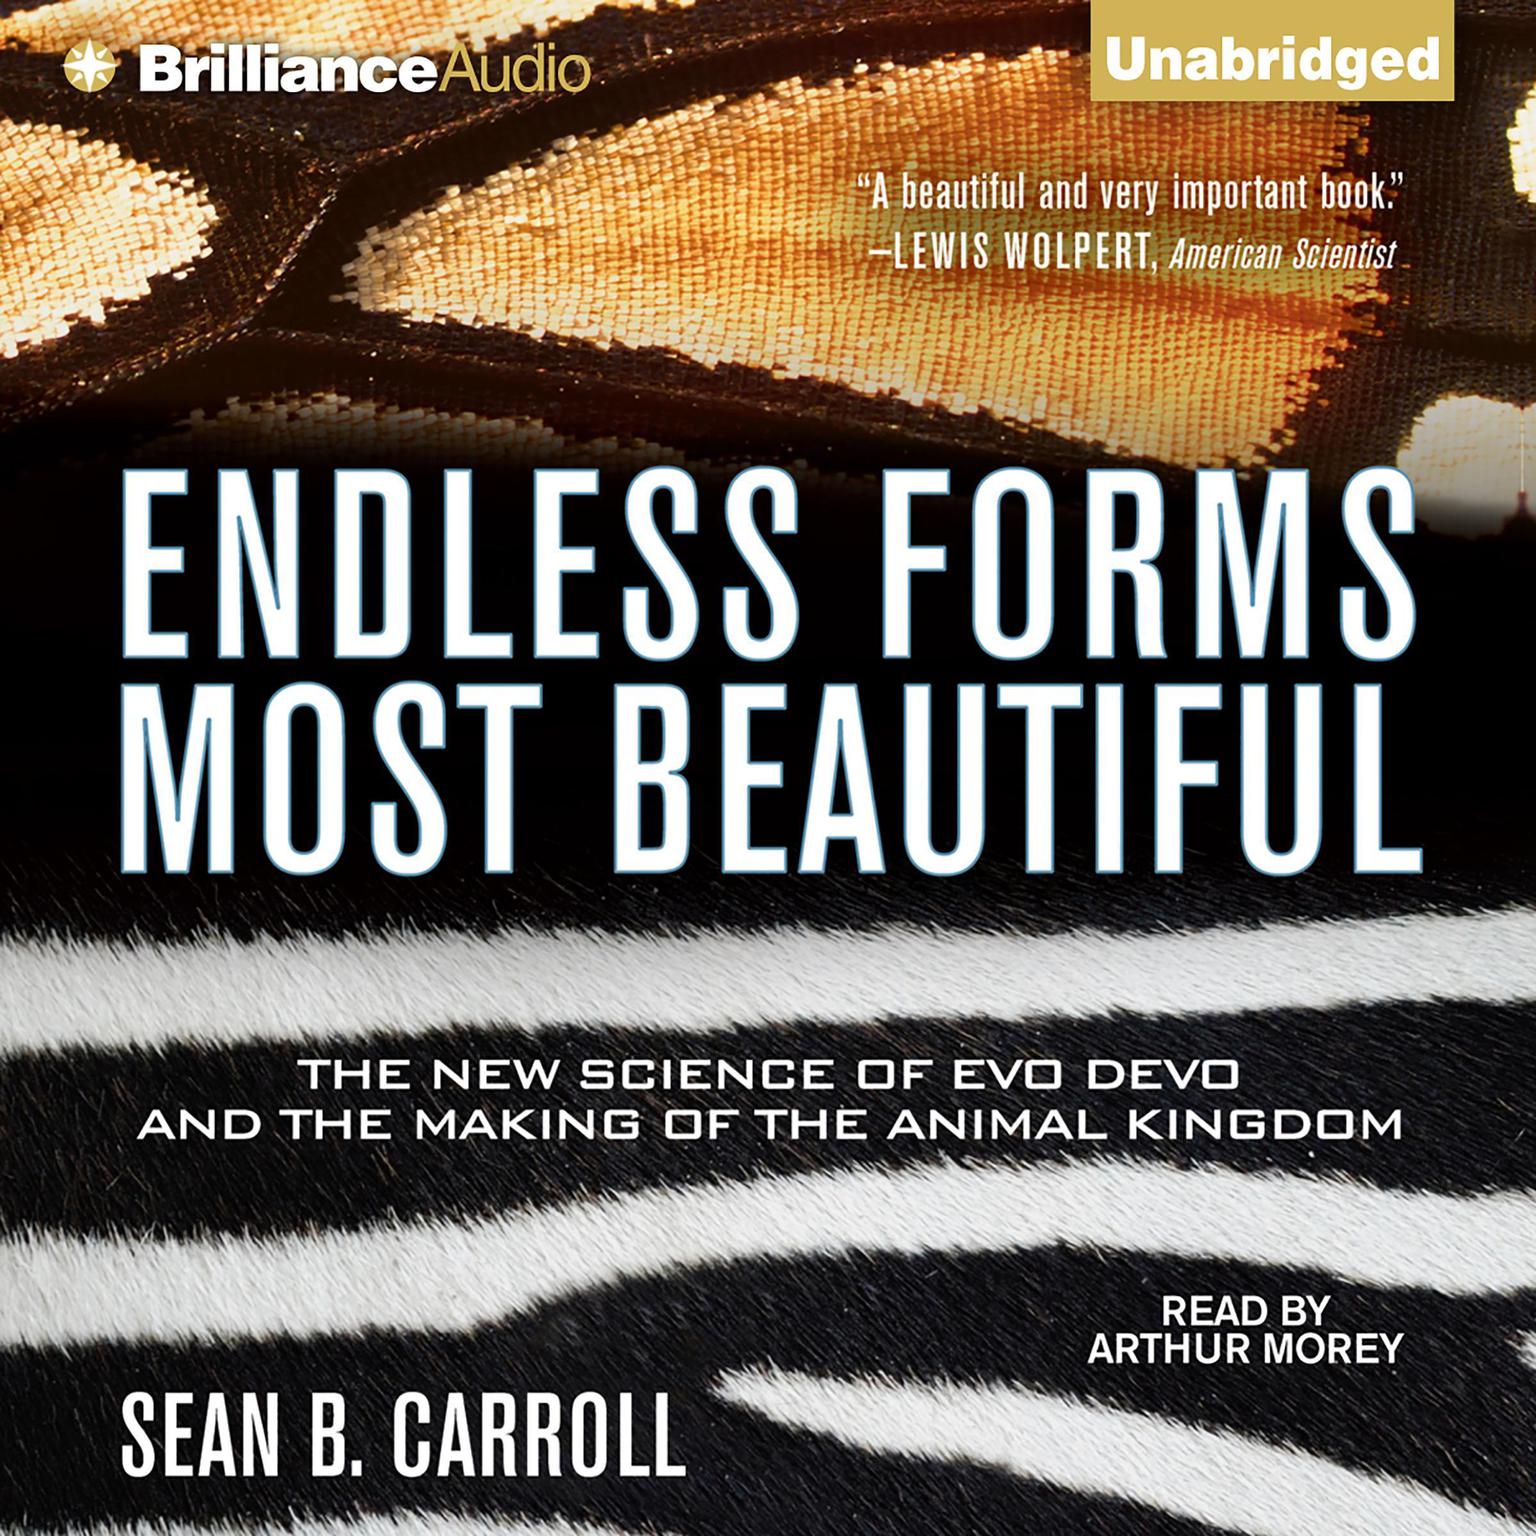 Endless Forms Most Beautiful: The New Science of Evo Devo and the Making of the Animal Kingdom Audiobook, by Sean B. Carroll